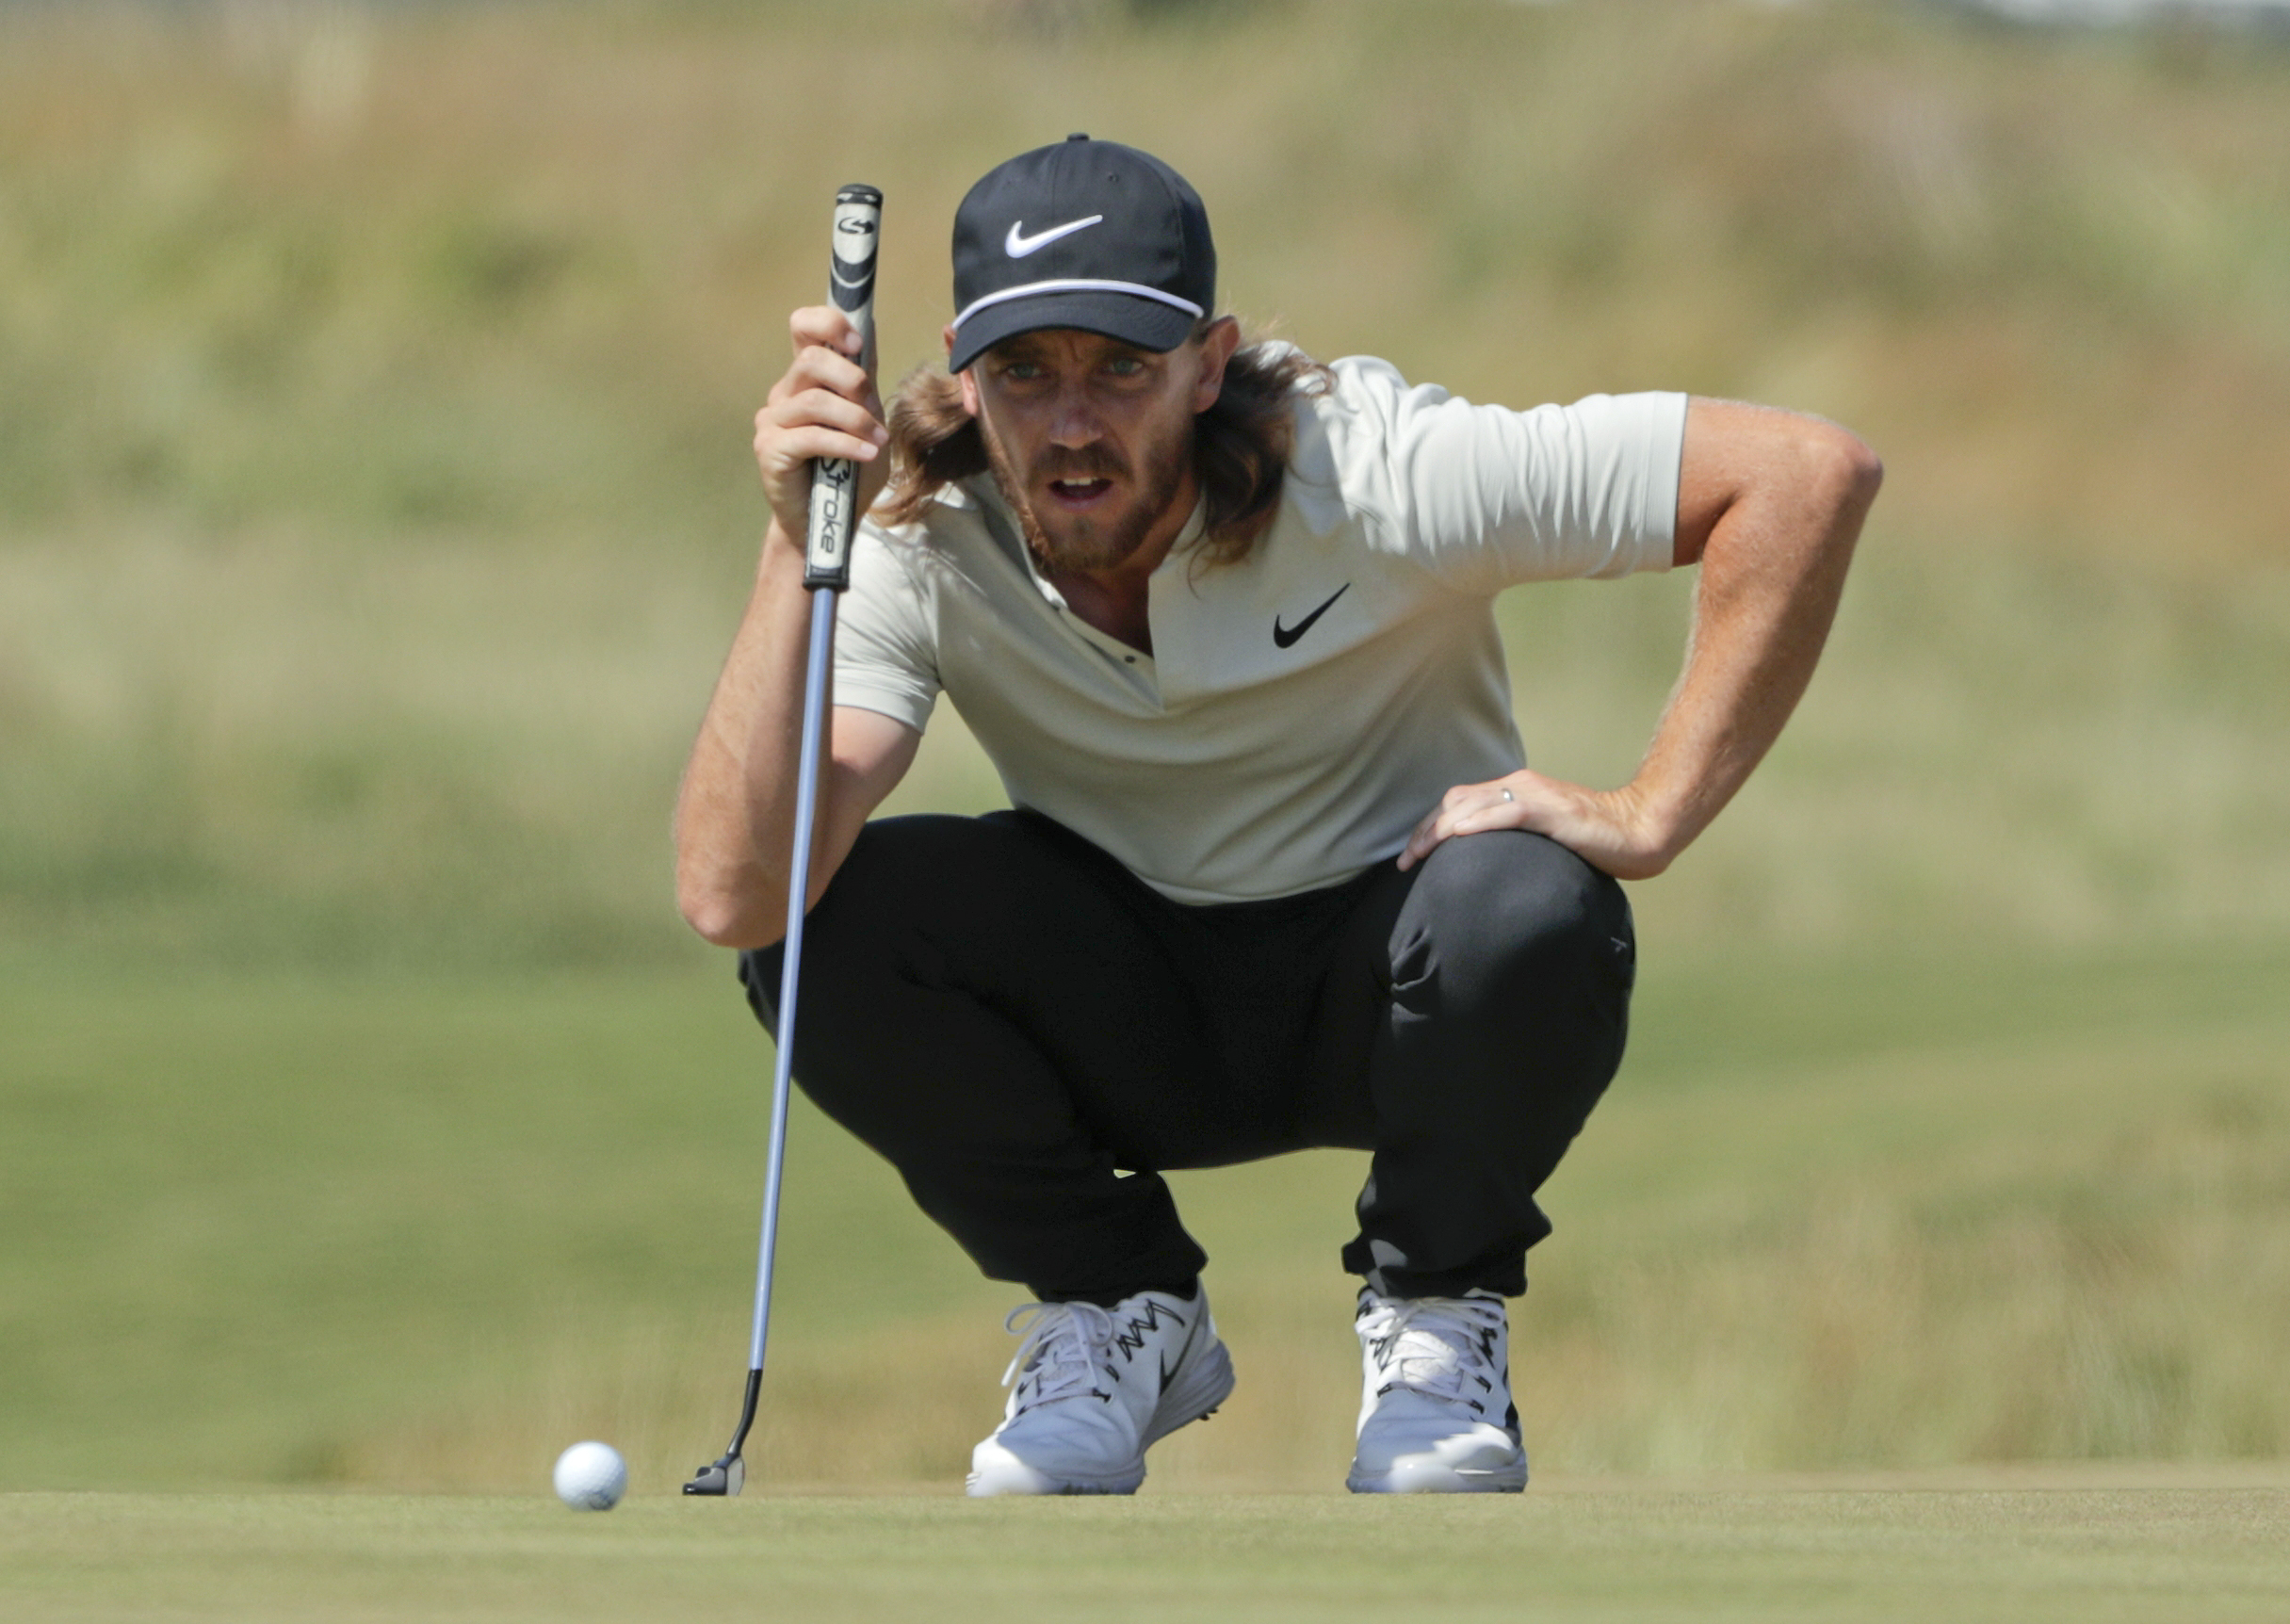 Fleetwood Hopes to End US Dominance at 147th Open Championship